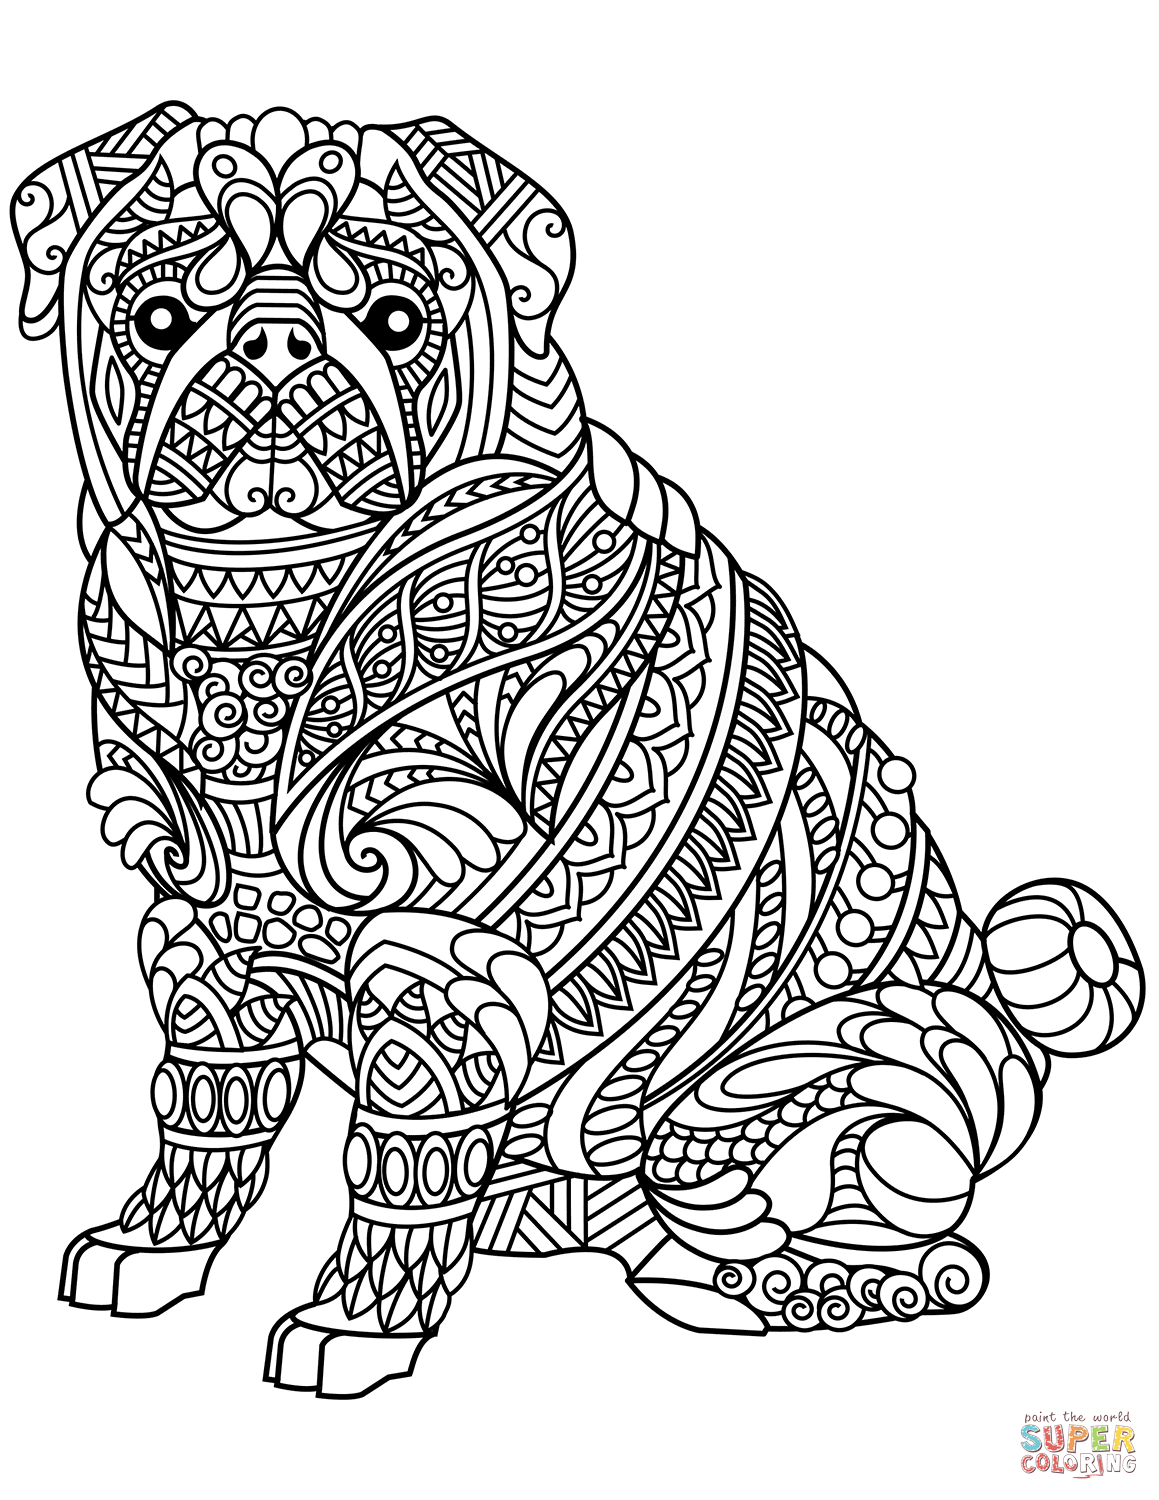 Pug dog zentangle coloring page free printable coloring pages